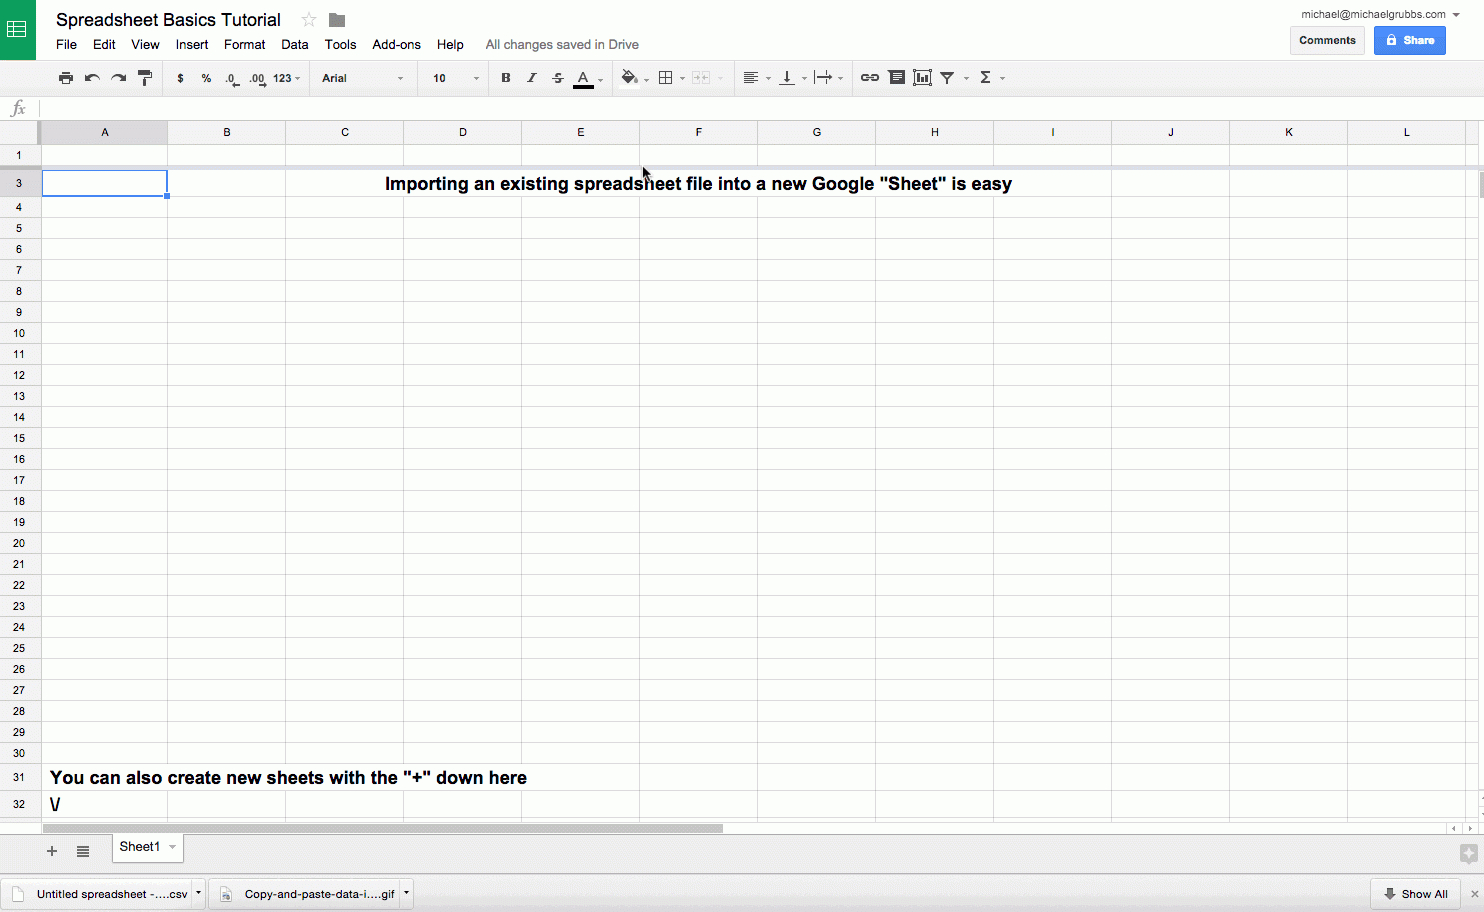 Learn How To Use Spreadsheets With Google Sheets 101: The Beginner's Guide To Online Spreadsheets  The